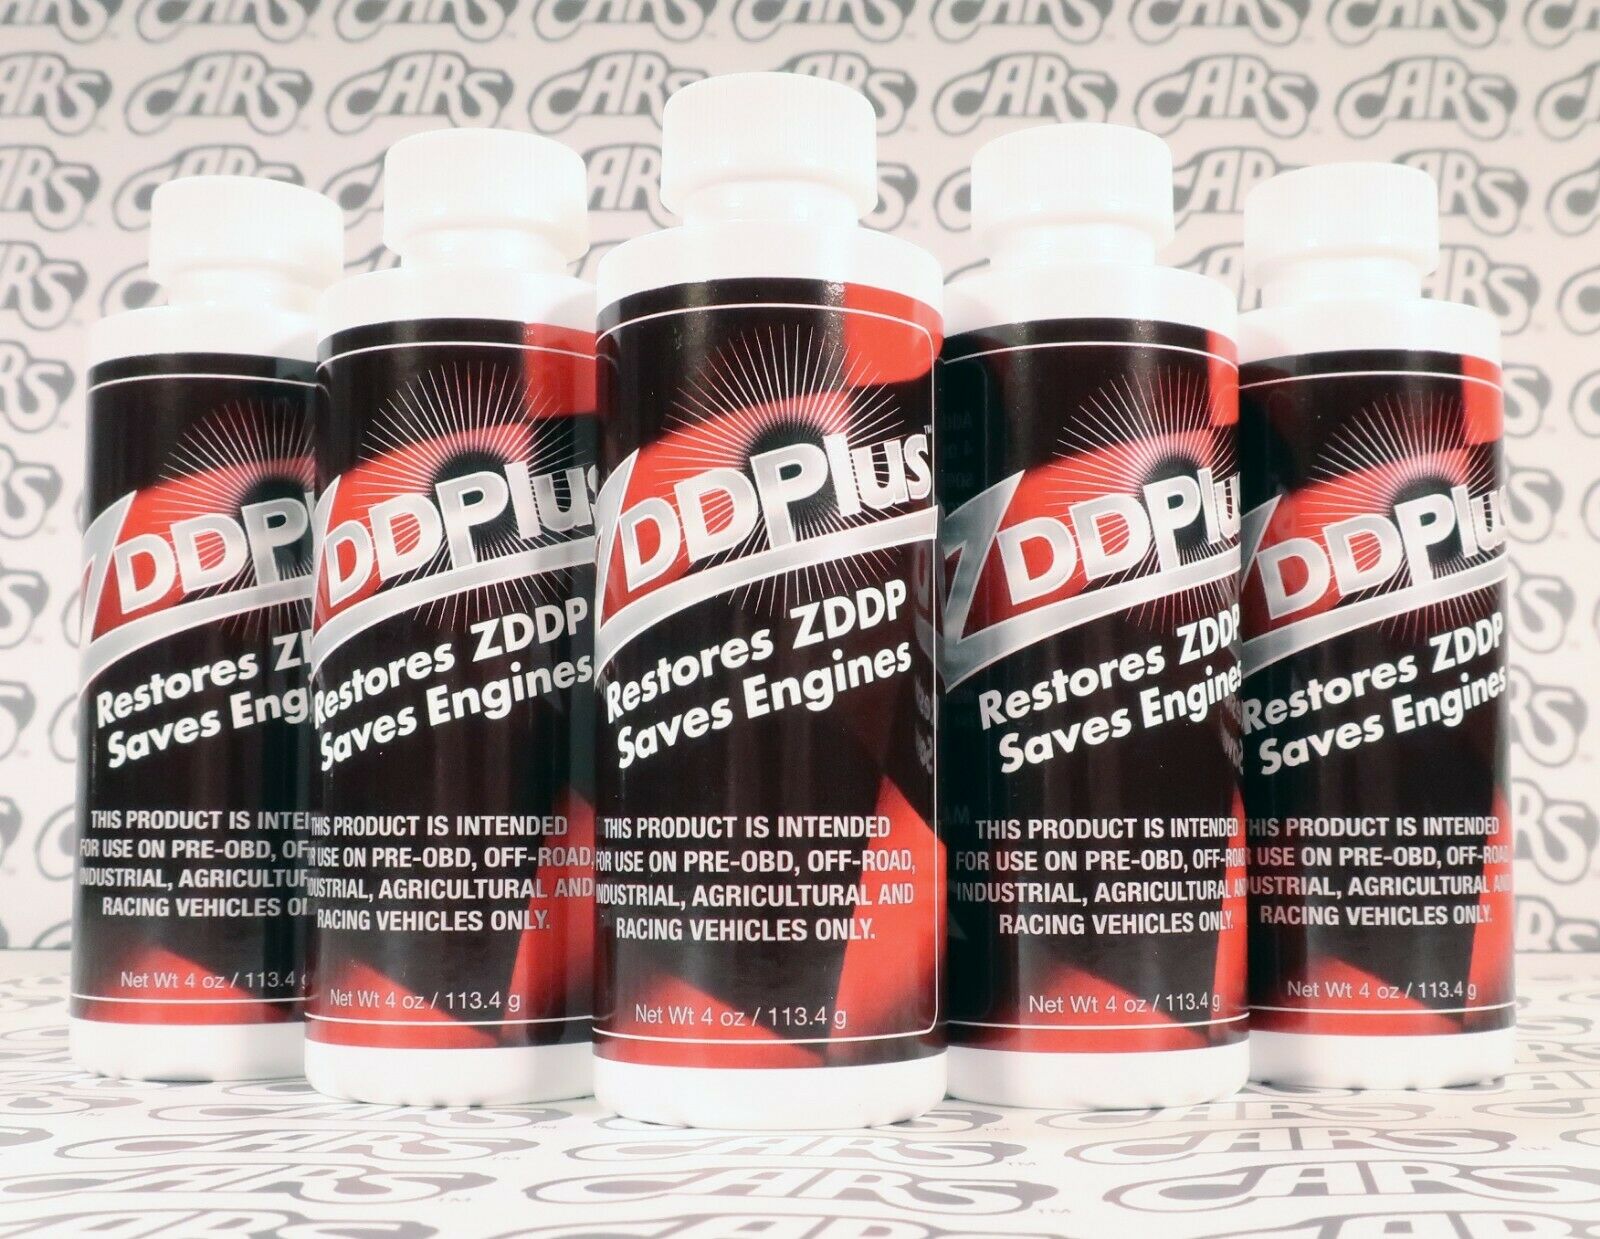 Zddplus Zddp Engine Oil Additive Restores Zinc Every Oil Change. 5 Pack Discount